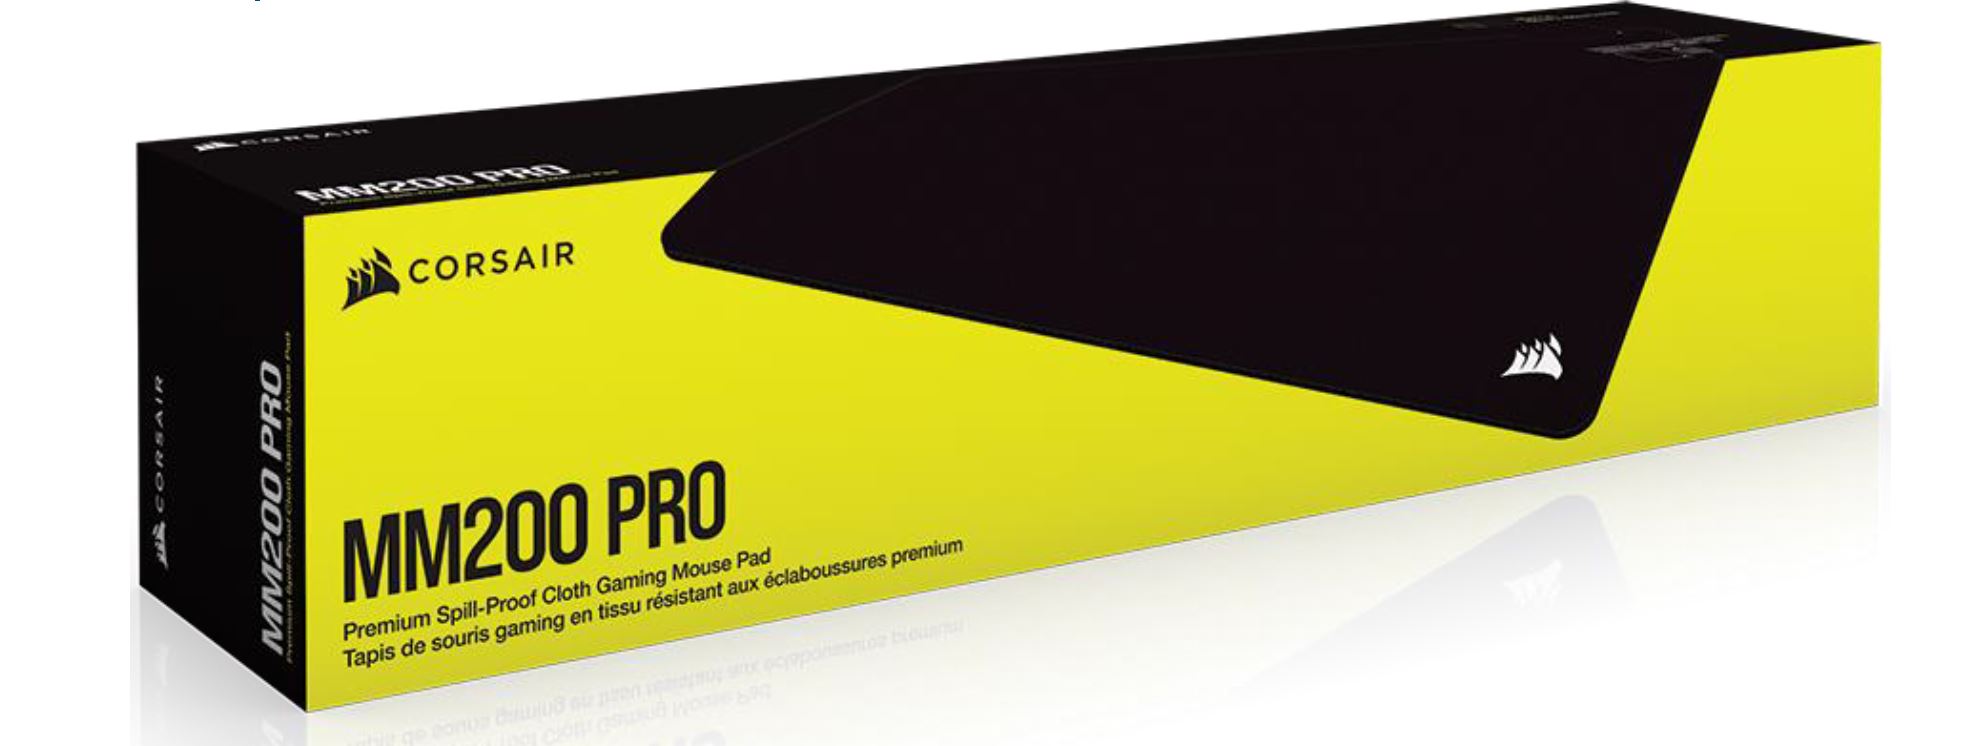 MM200 PRO Premium Spill-Proof Cloth Gaming Mouse Pad Heavy XL - 450mm x 400mm surface, Black Surface